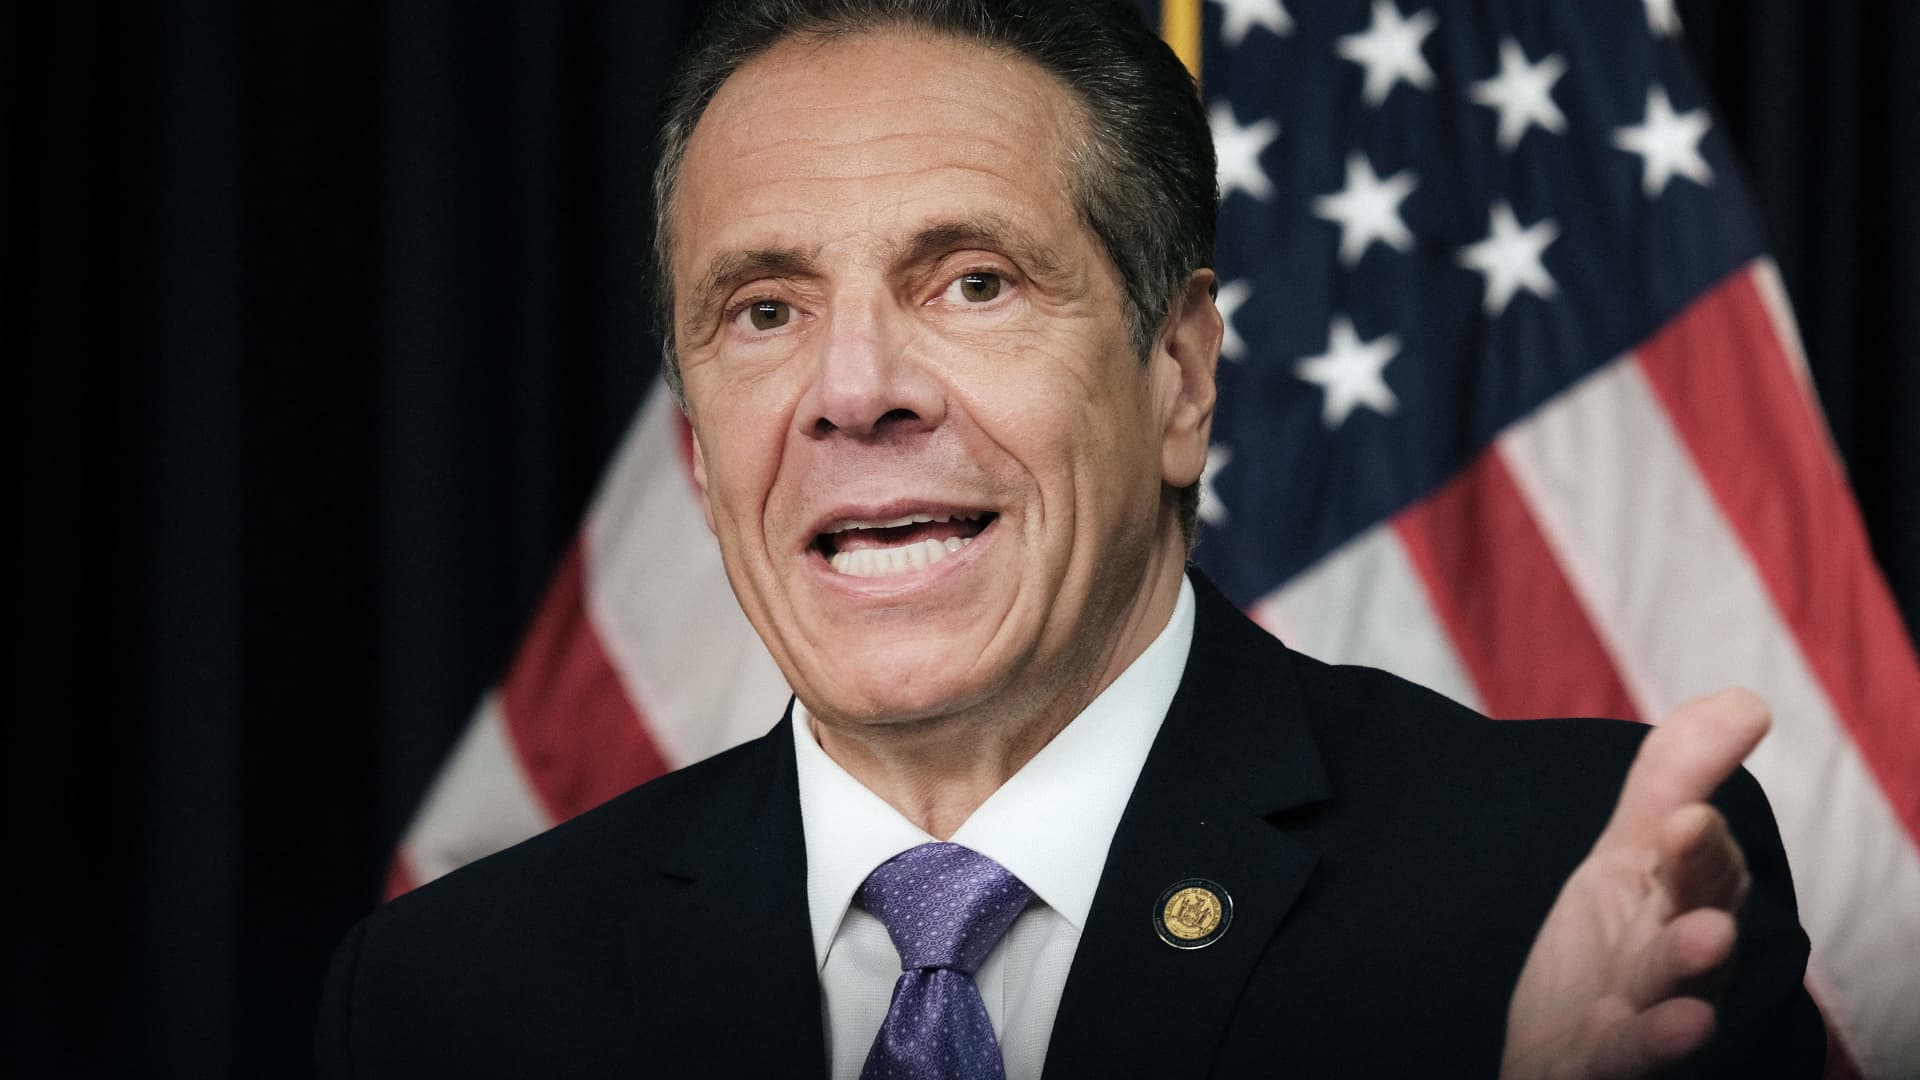 New York Governor Andrew Cuomo speaks to the media at a news conference in Manhattan on May 5, 2021 in New York City.